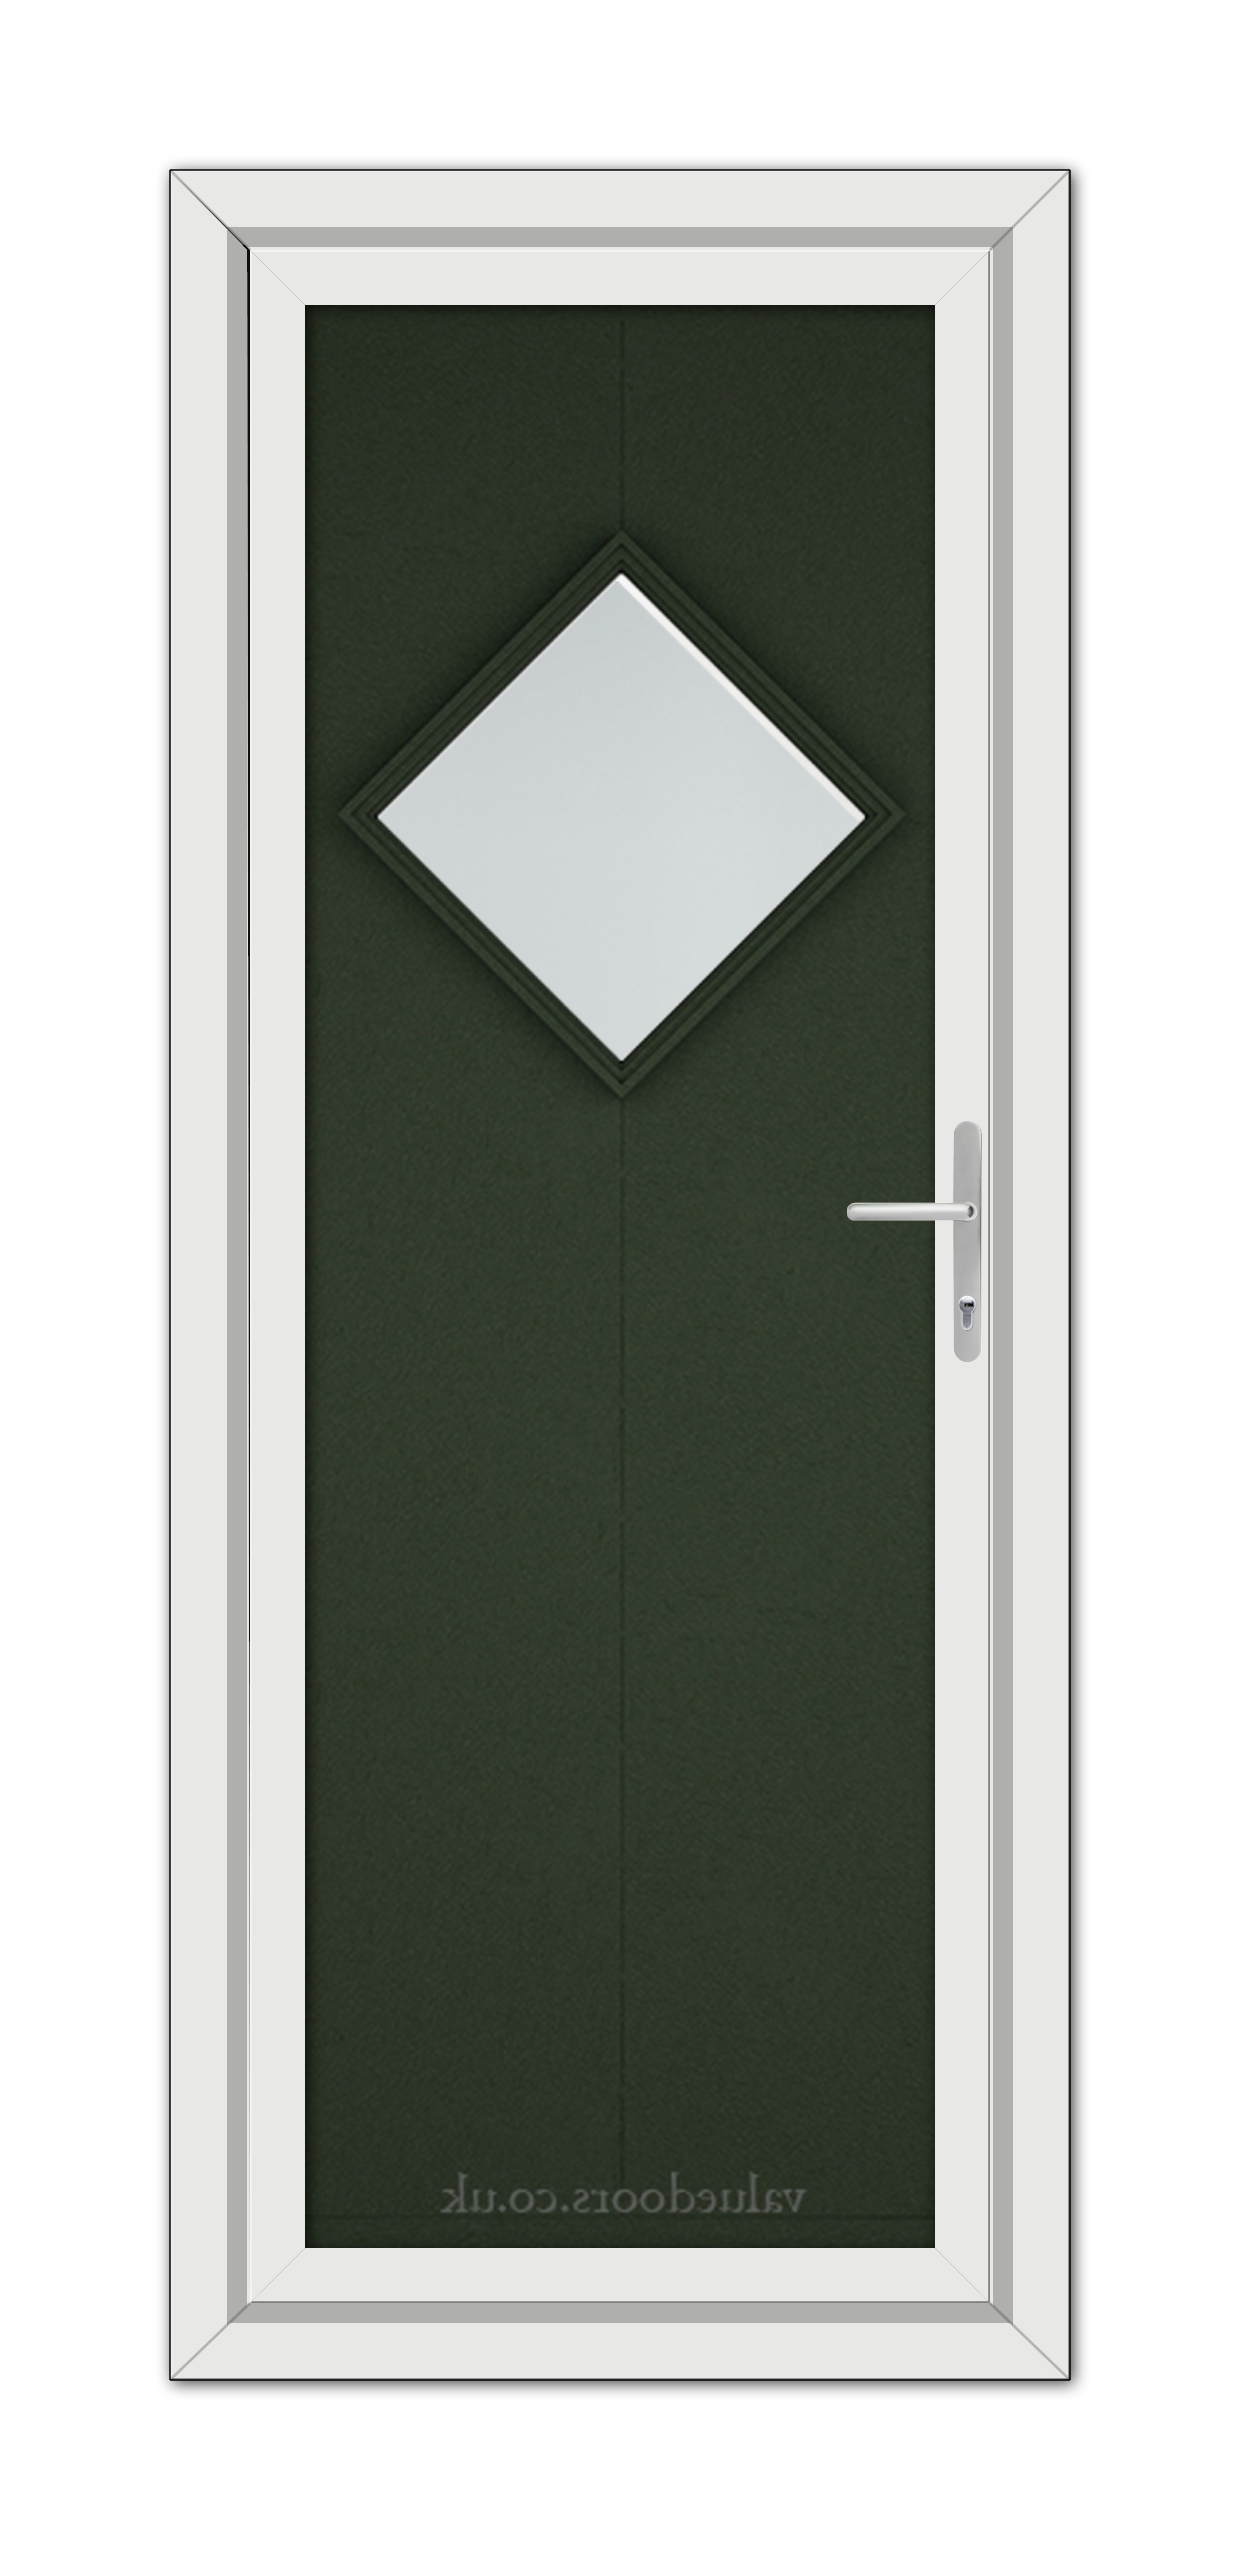 A modern Green Hamburg uPVC Door with a diamond-shaped window and a white door frame, including a silver handle on the right side.